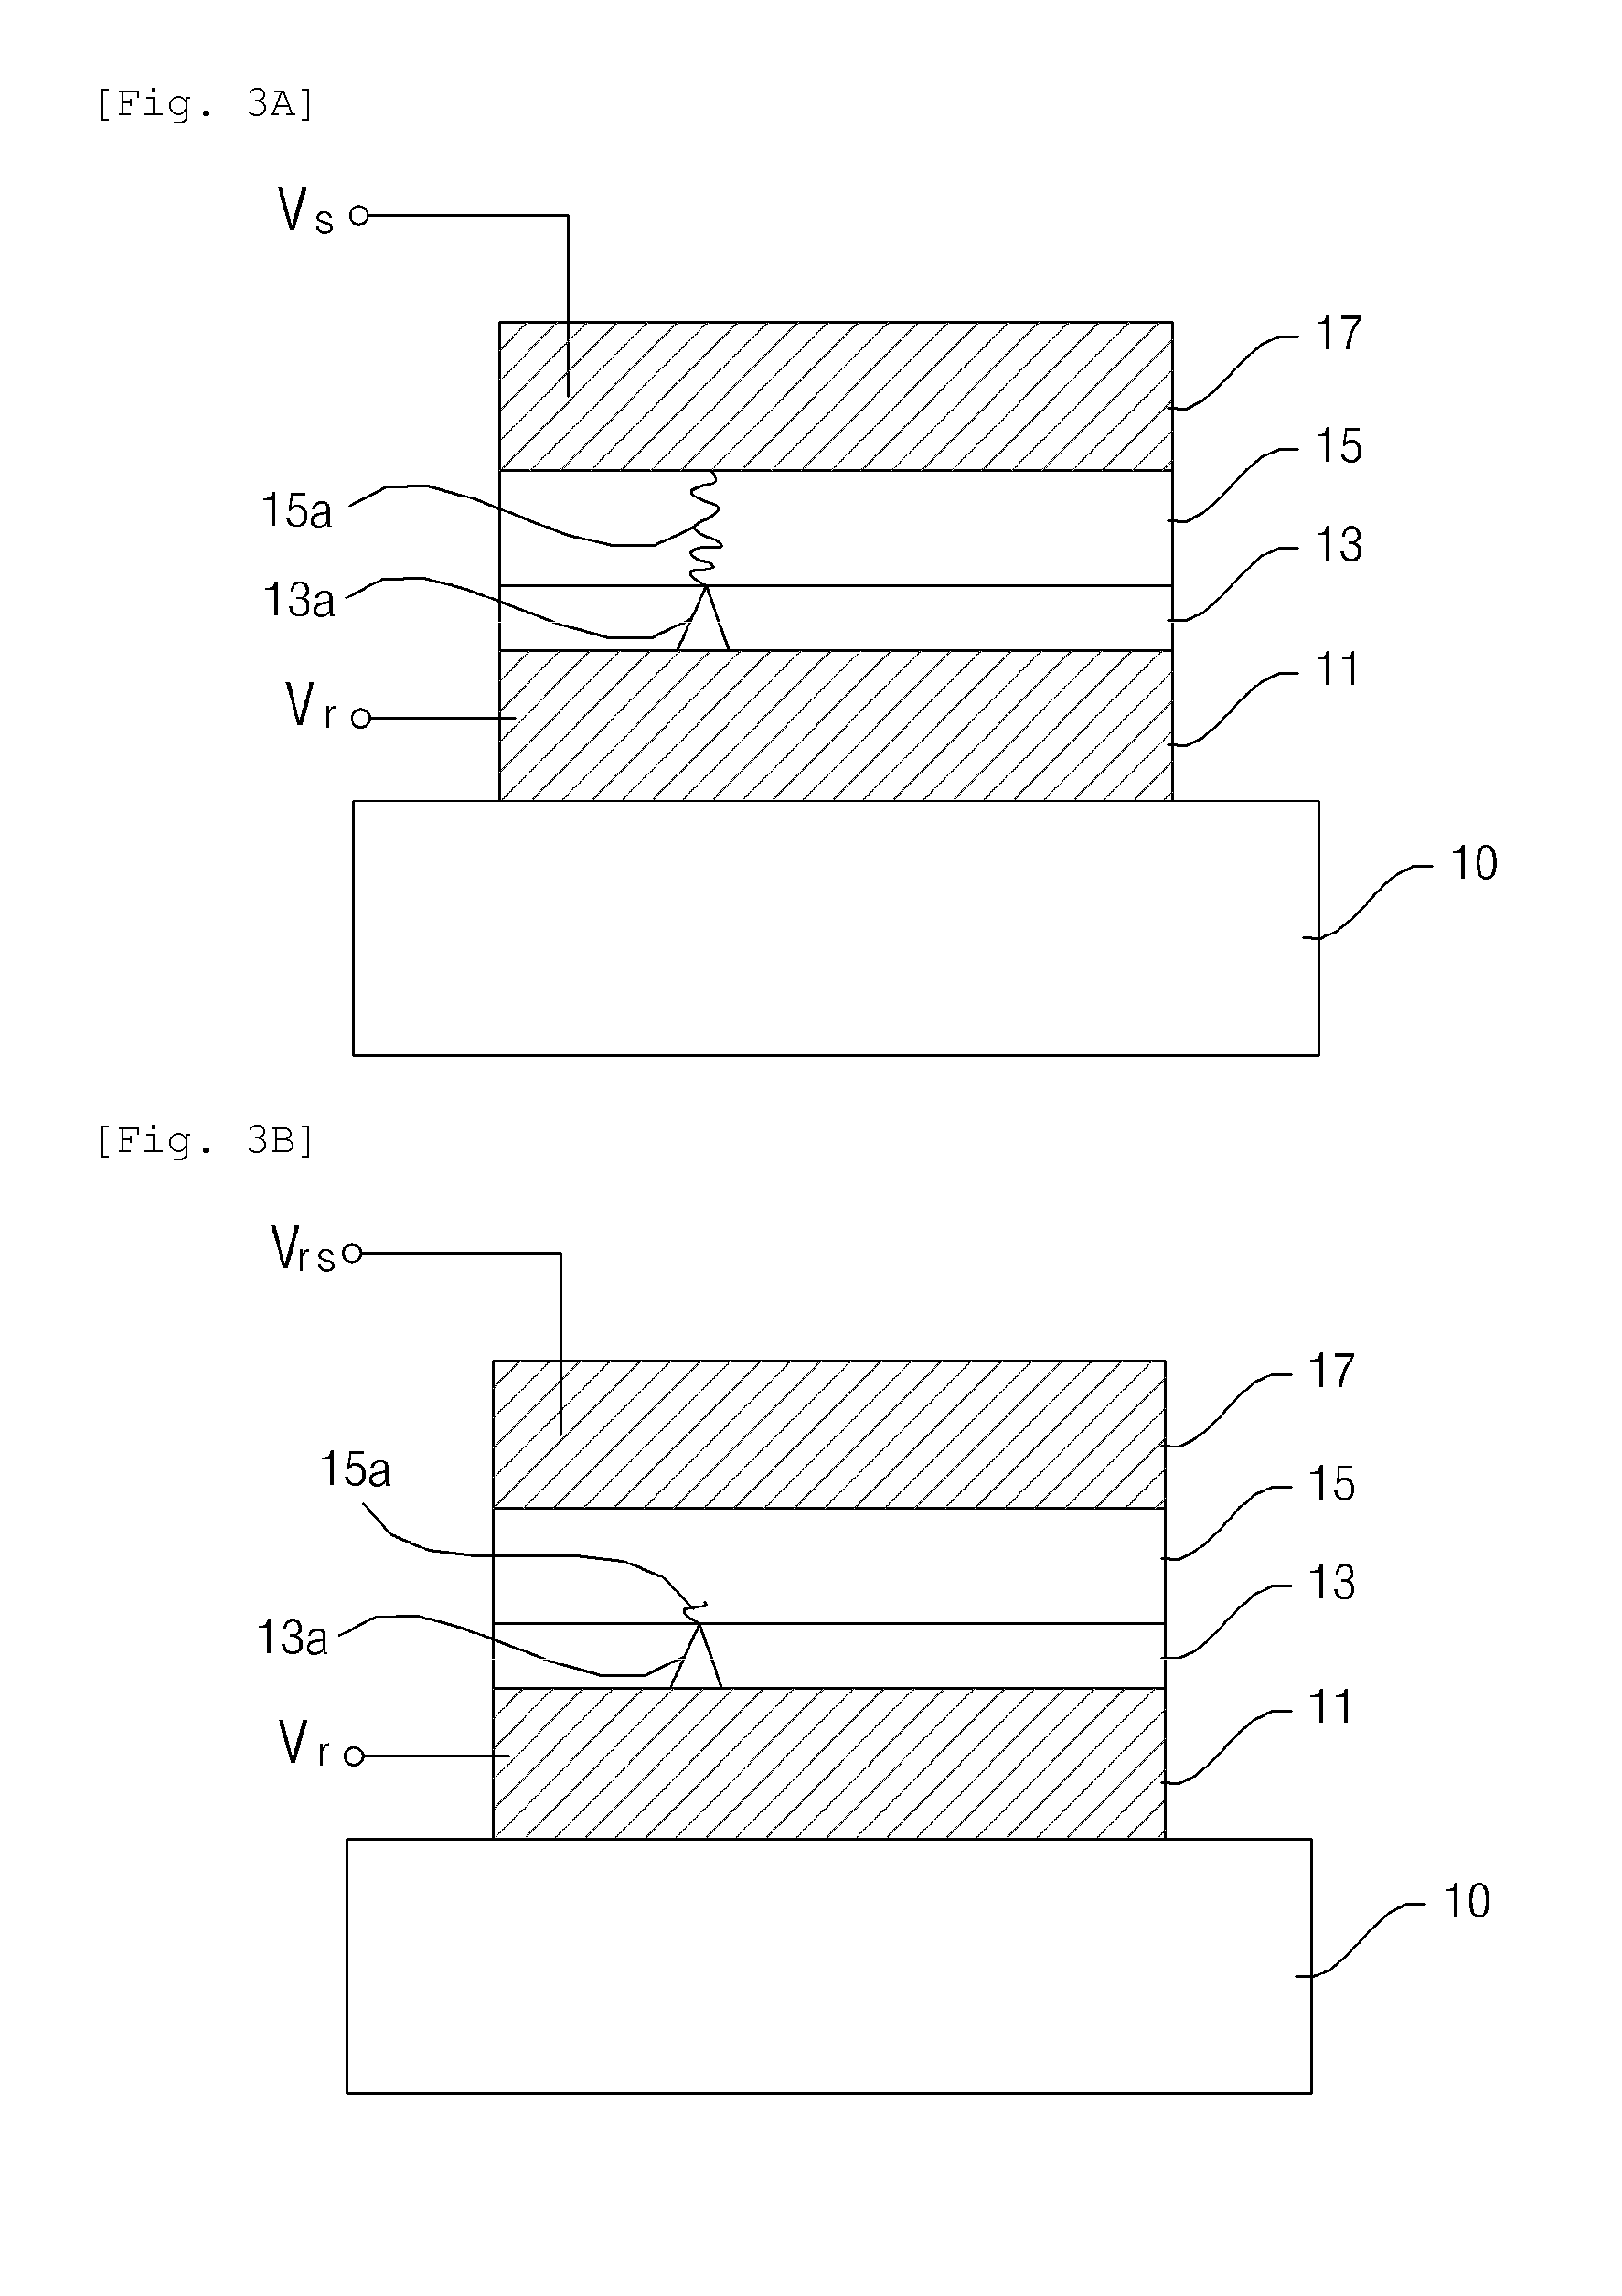 Resistance ram having oxide layer and solid electrolyte layer, and method for operating the same